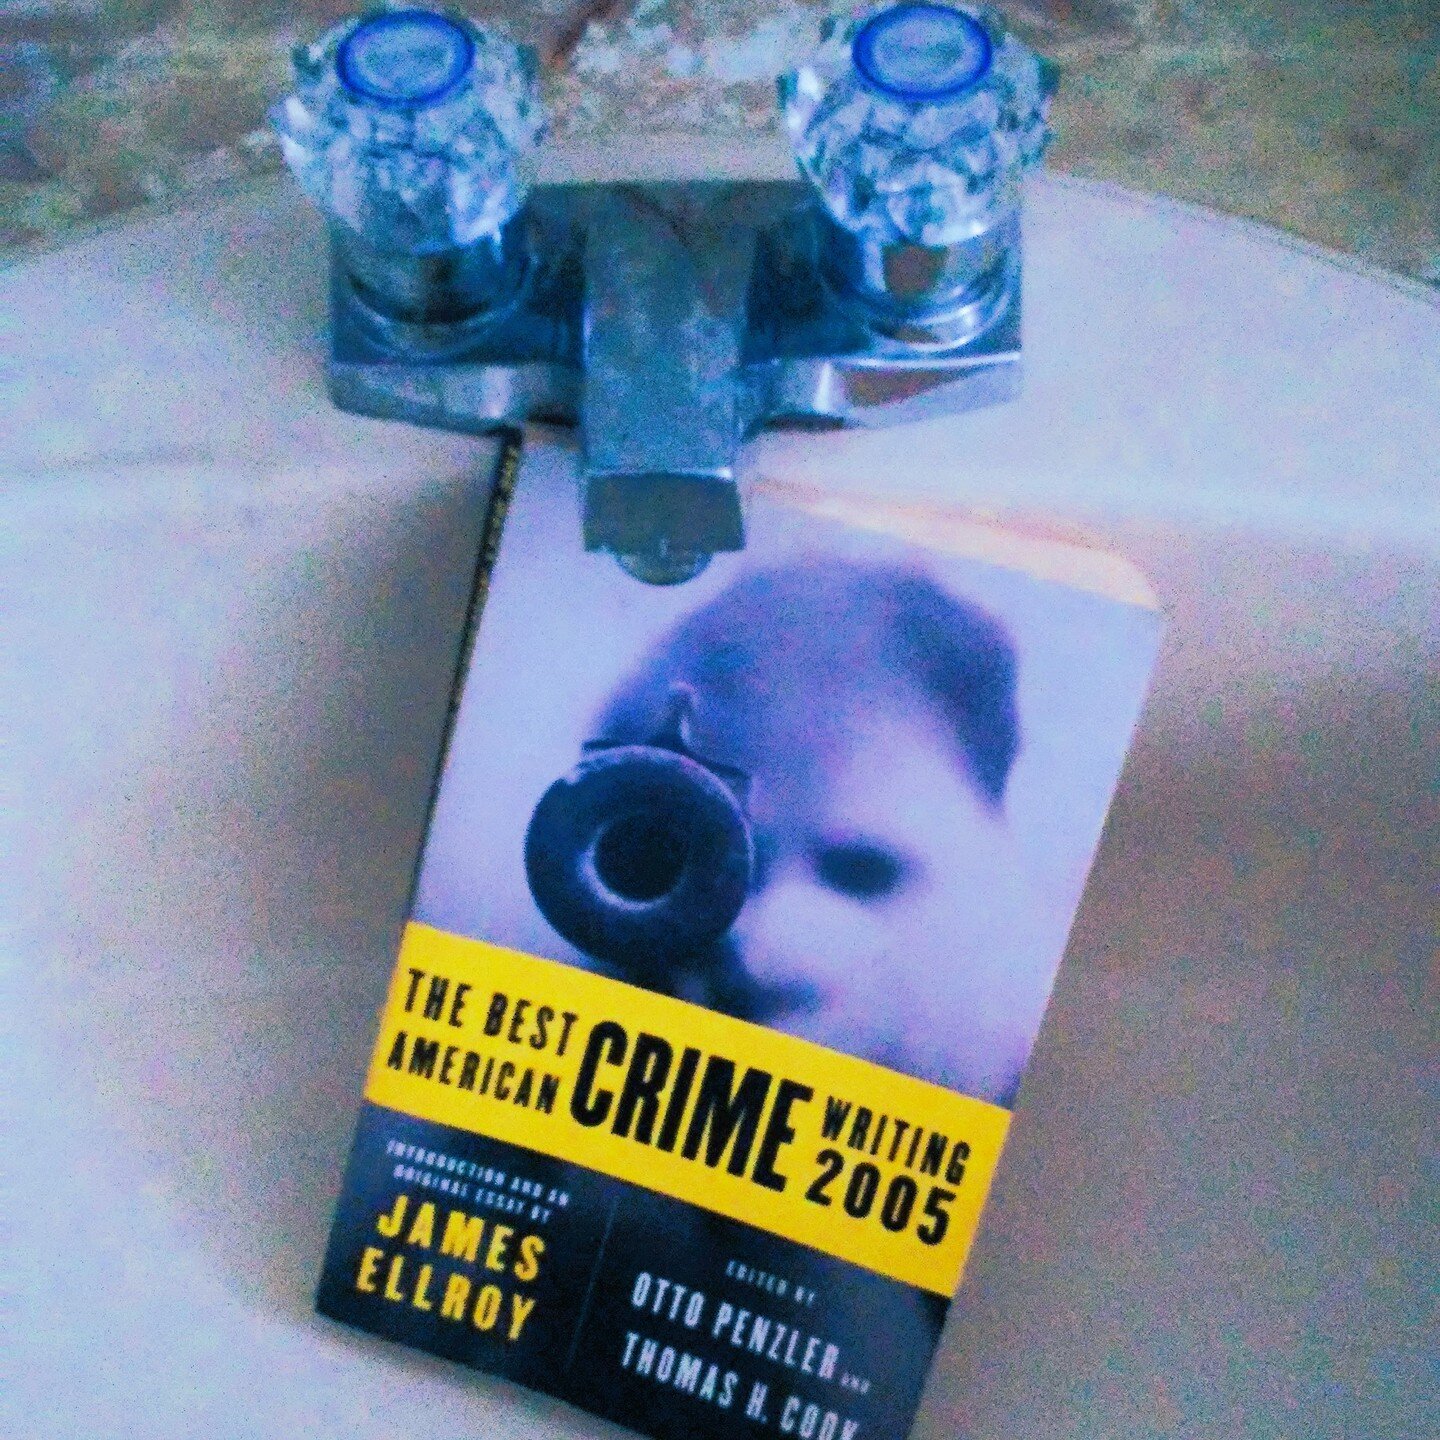 The Best American Crime Writing 2005
ed. by Otto Pnzler and Thomas H. Cook, Intro by James Ellroy.

&quot;He's not a completely bad person,&quot; she told me. &quot;He's a very likable person. I think his big problem was intelligence and no common se